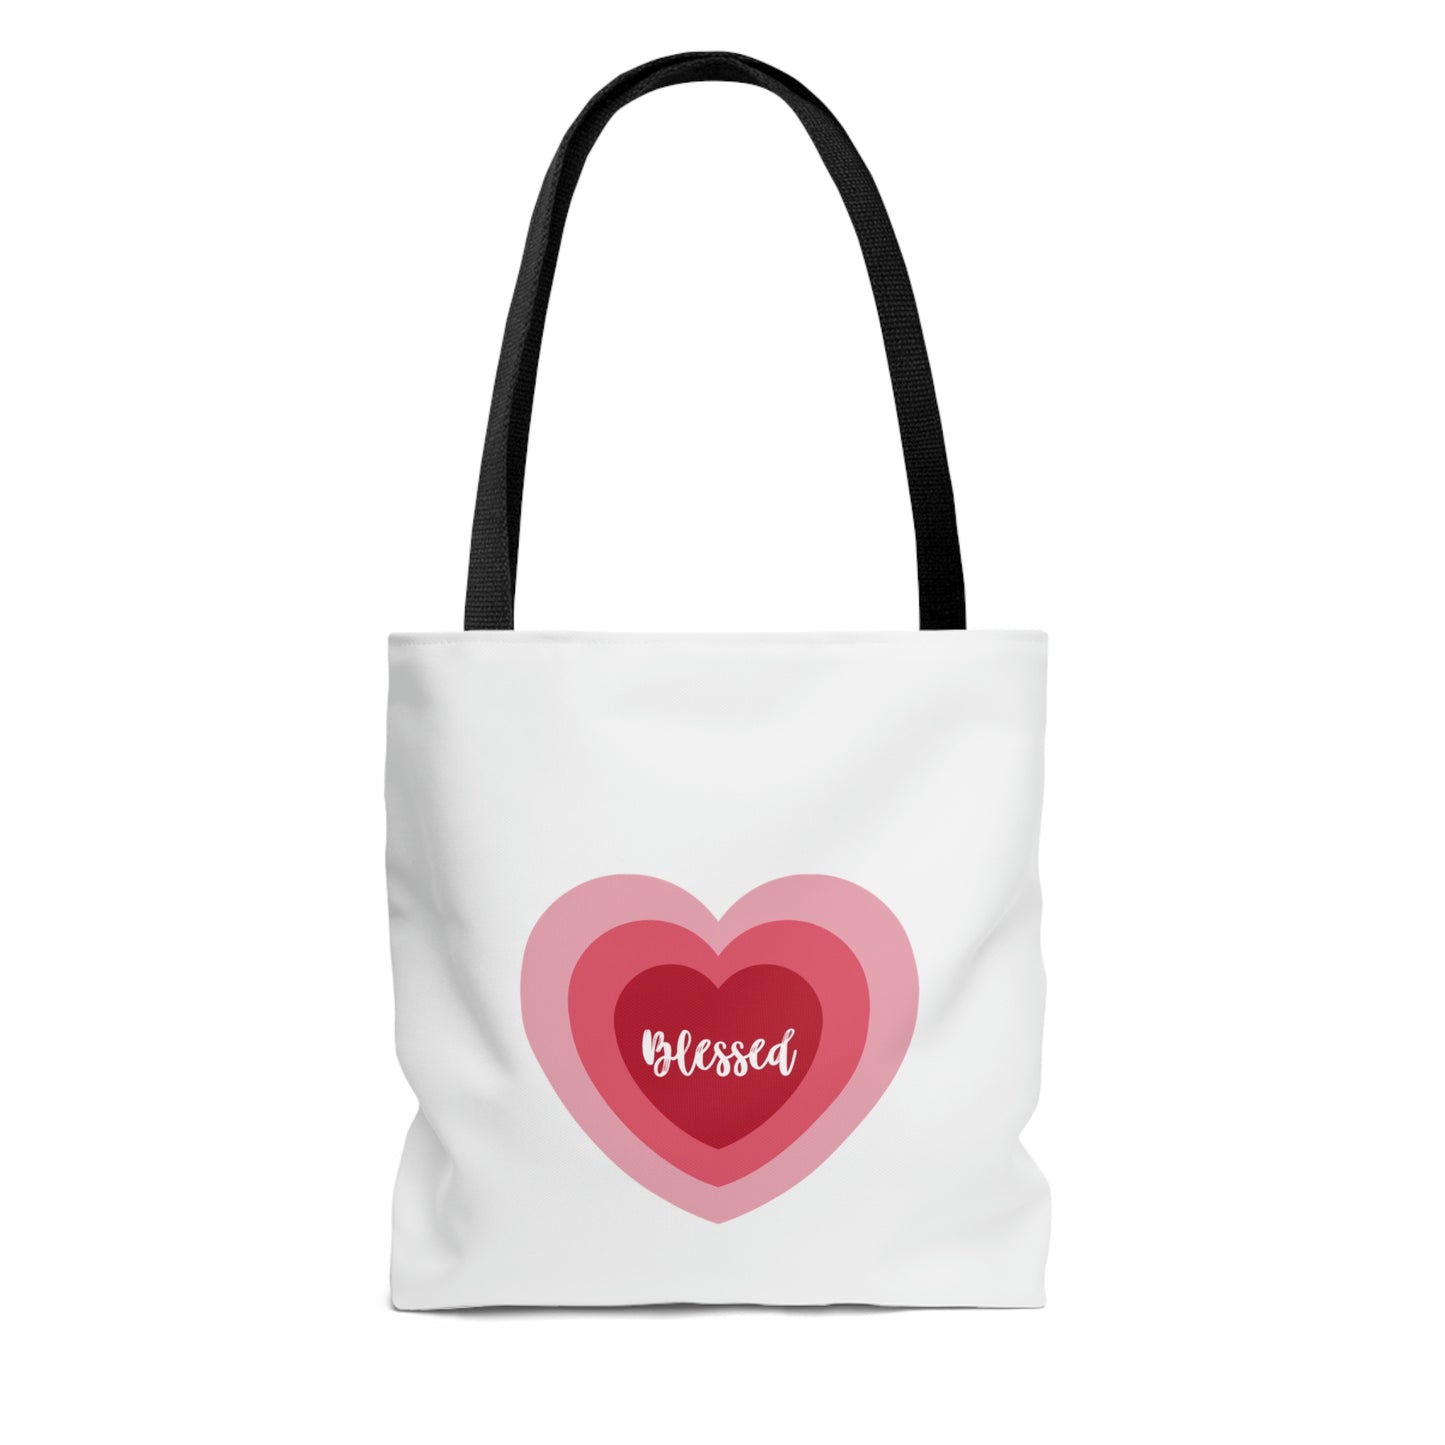 Blessed Heart Tote Bag